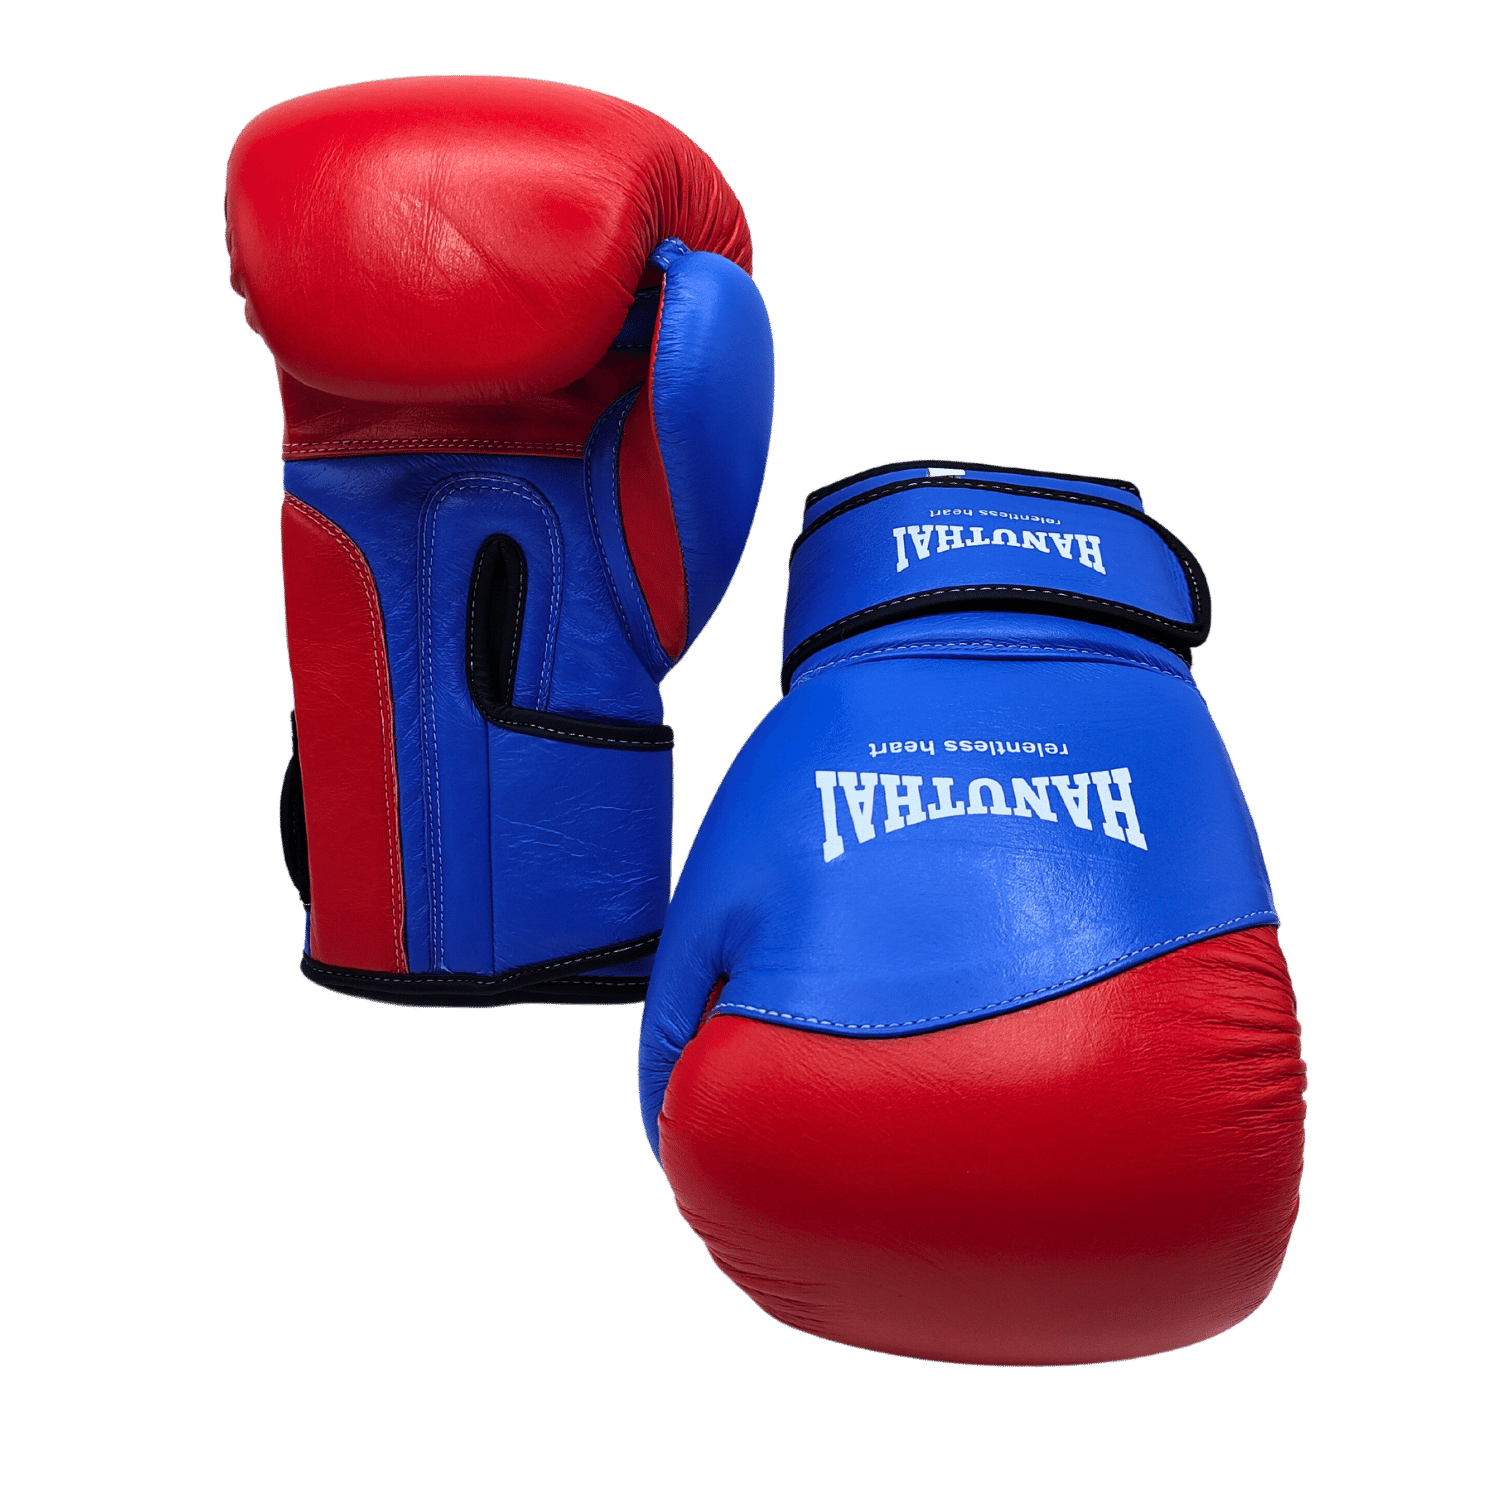 A pair of Hanuthai genuine leather blue and red Muay Thai boxing gloves positioned against a green background.